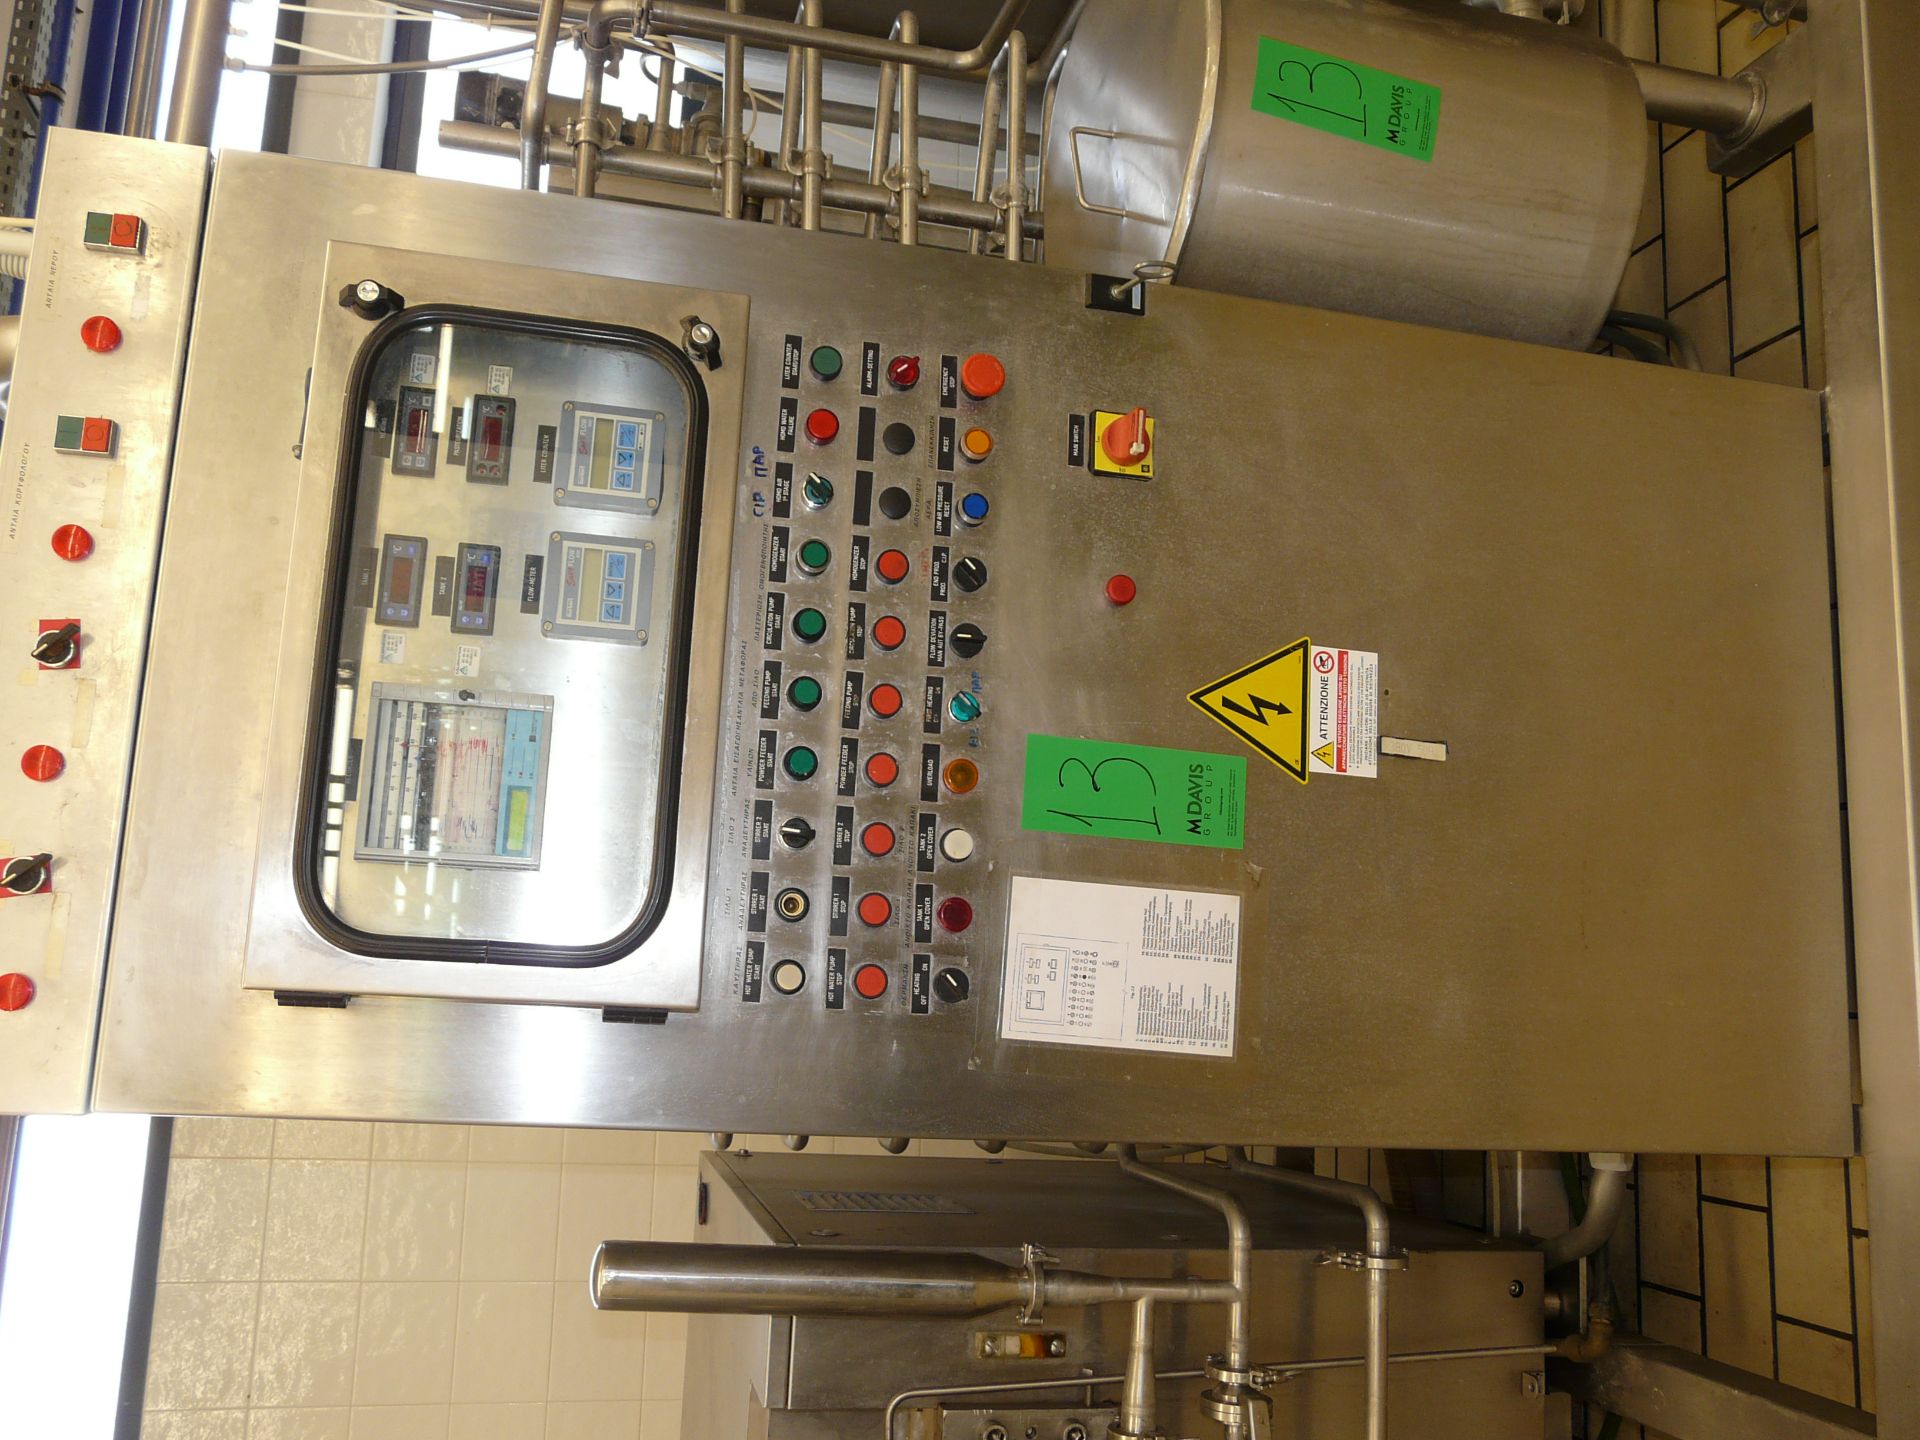 English: TETRA PAK HOYER HTST SYSTEM, 1200 Pasteurizer for Ice Cream, Contains 2 x Tanks with - Image 6 of 45